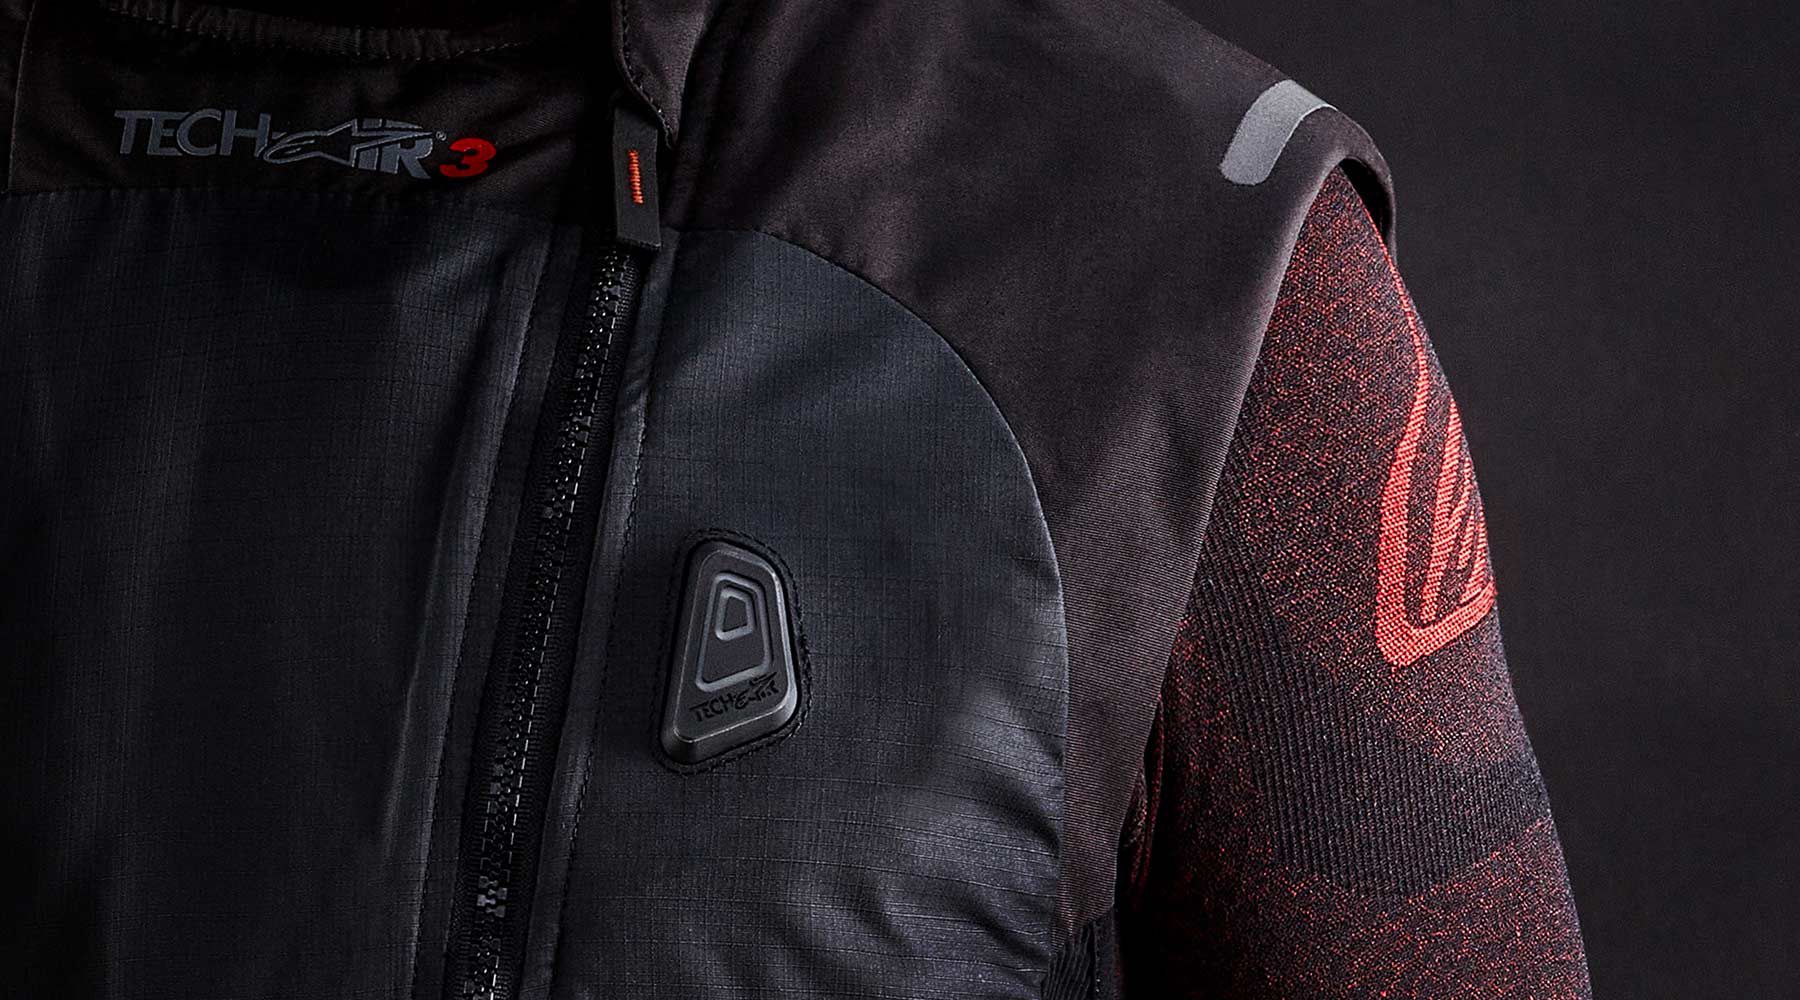 An LED light on the chest of the Tech-Air 3 displays the system’s status and haptic alerts communicate with the rider while the vest is worn.